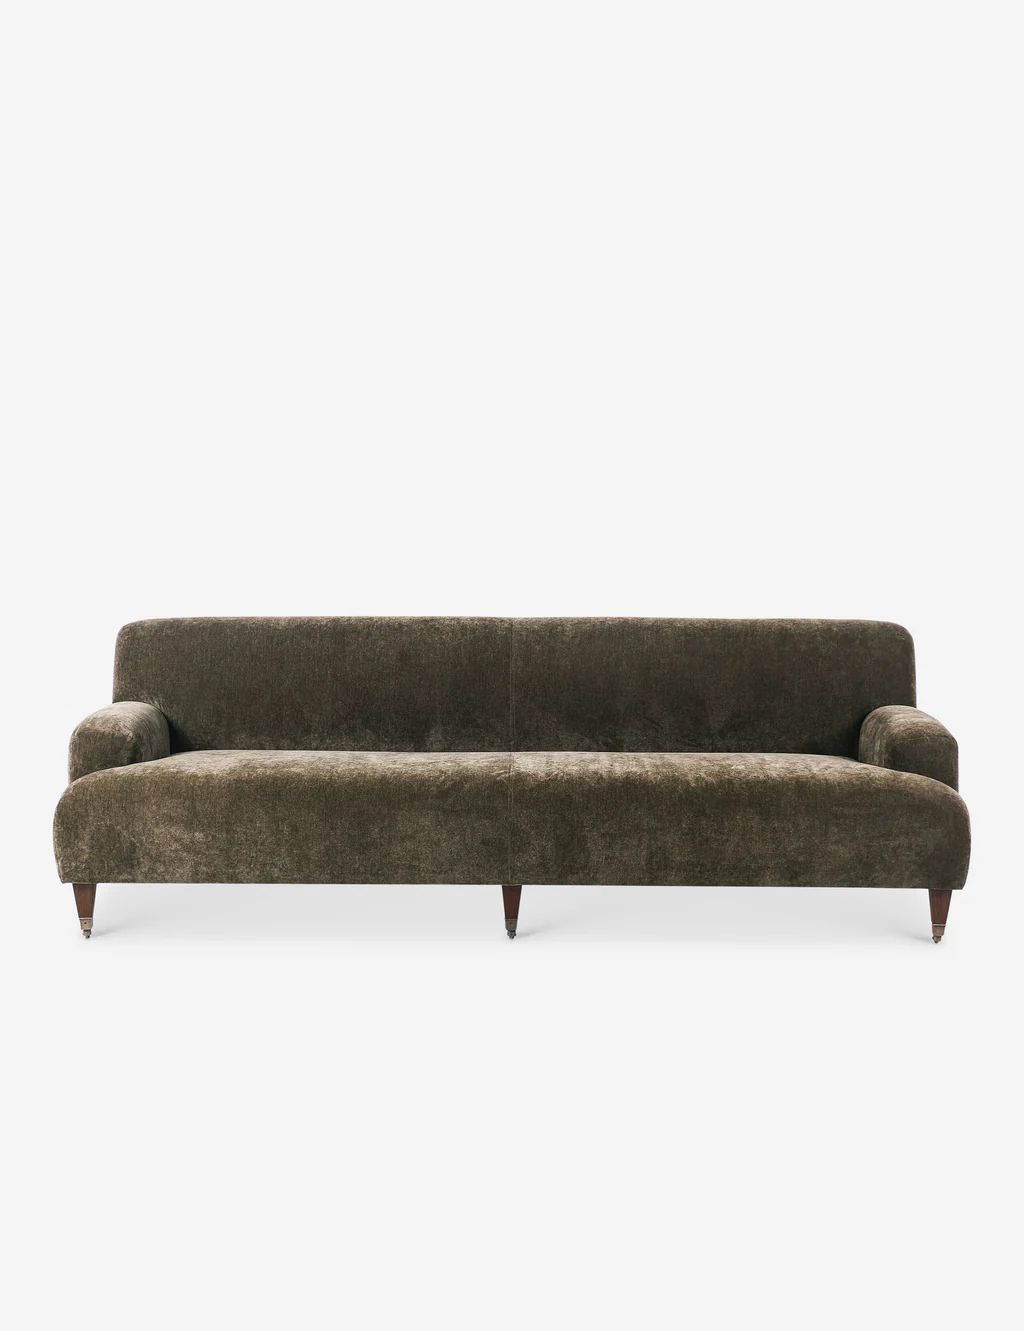 Kent Sofa by Amber Lewis x Four Hands | Lulu and Georgia 